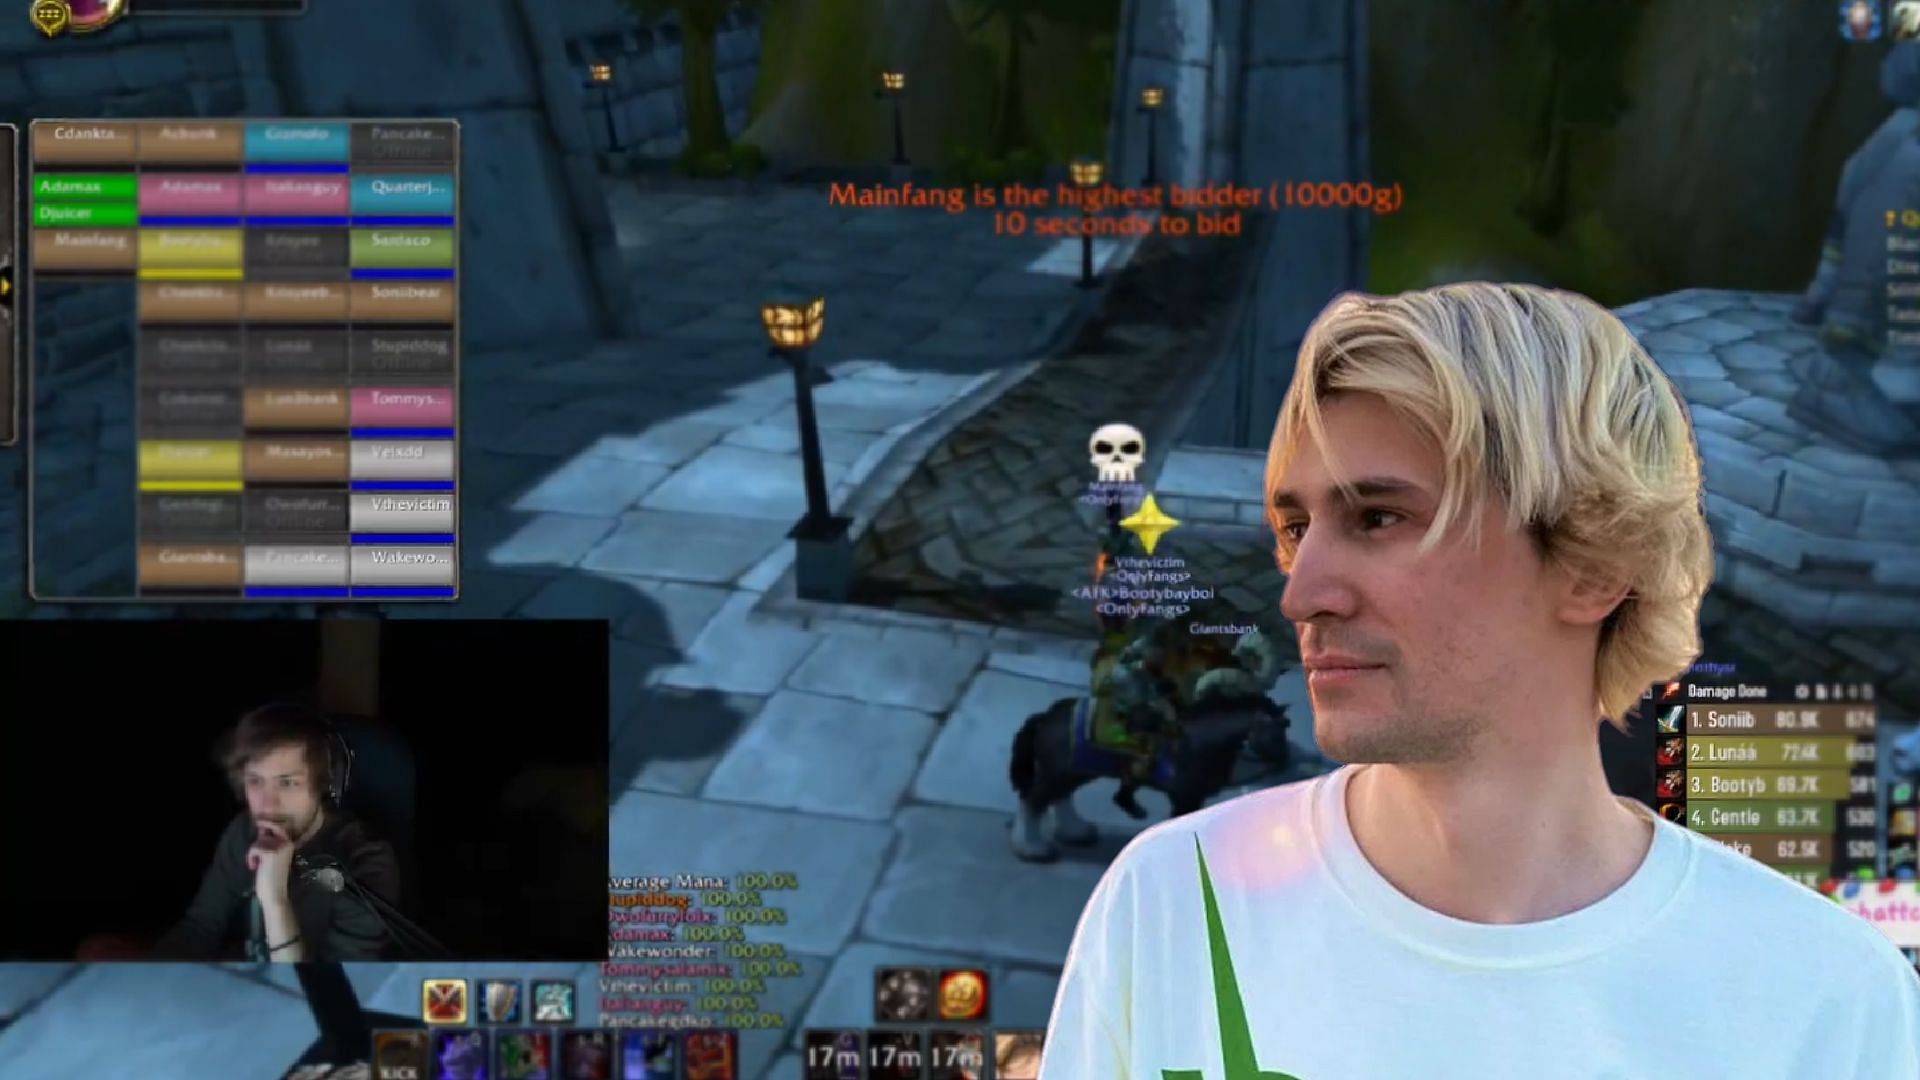 xQc and Sodapoppin get into a bidding war in World of Warcraft (Image via Sodapoppin/Twitch)